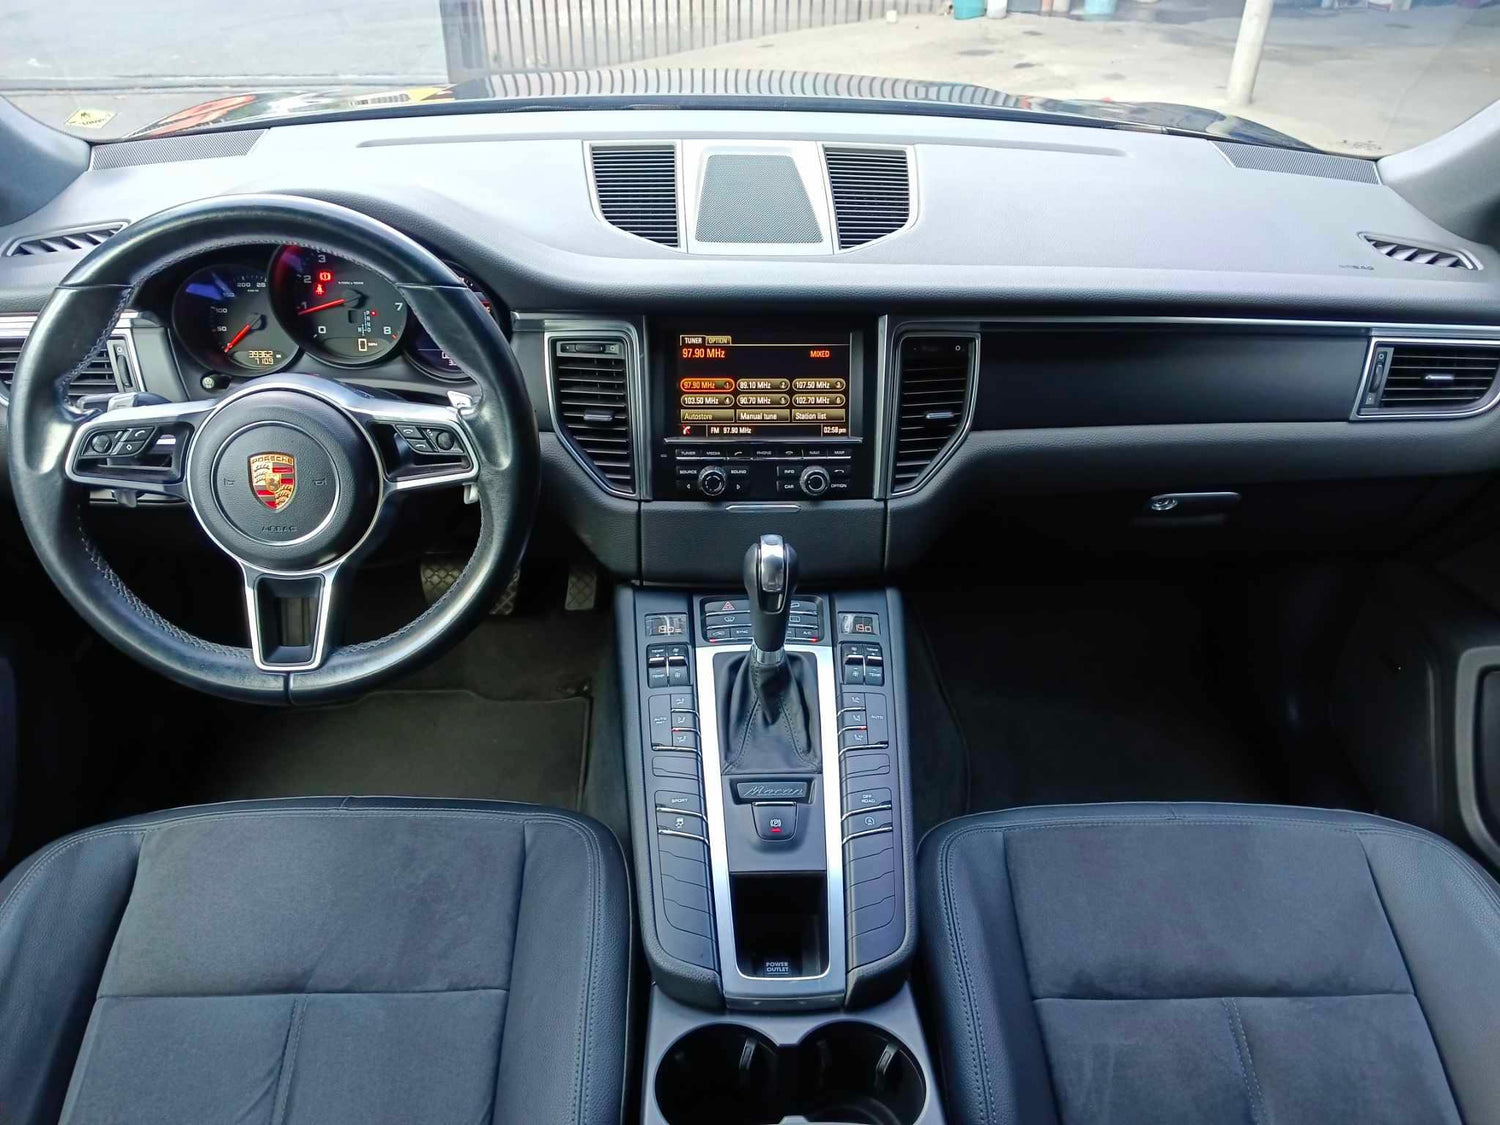 2015 PORSCHE MACAN GAS AUTOMATIC TRANSMISSION | Secondhand Used Cars for Sale at Manila Auto Display.